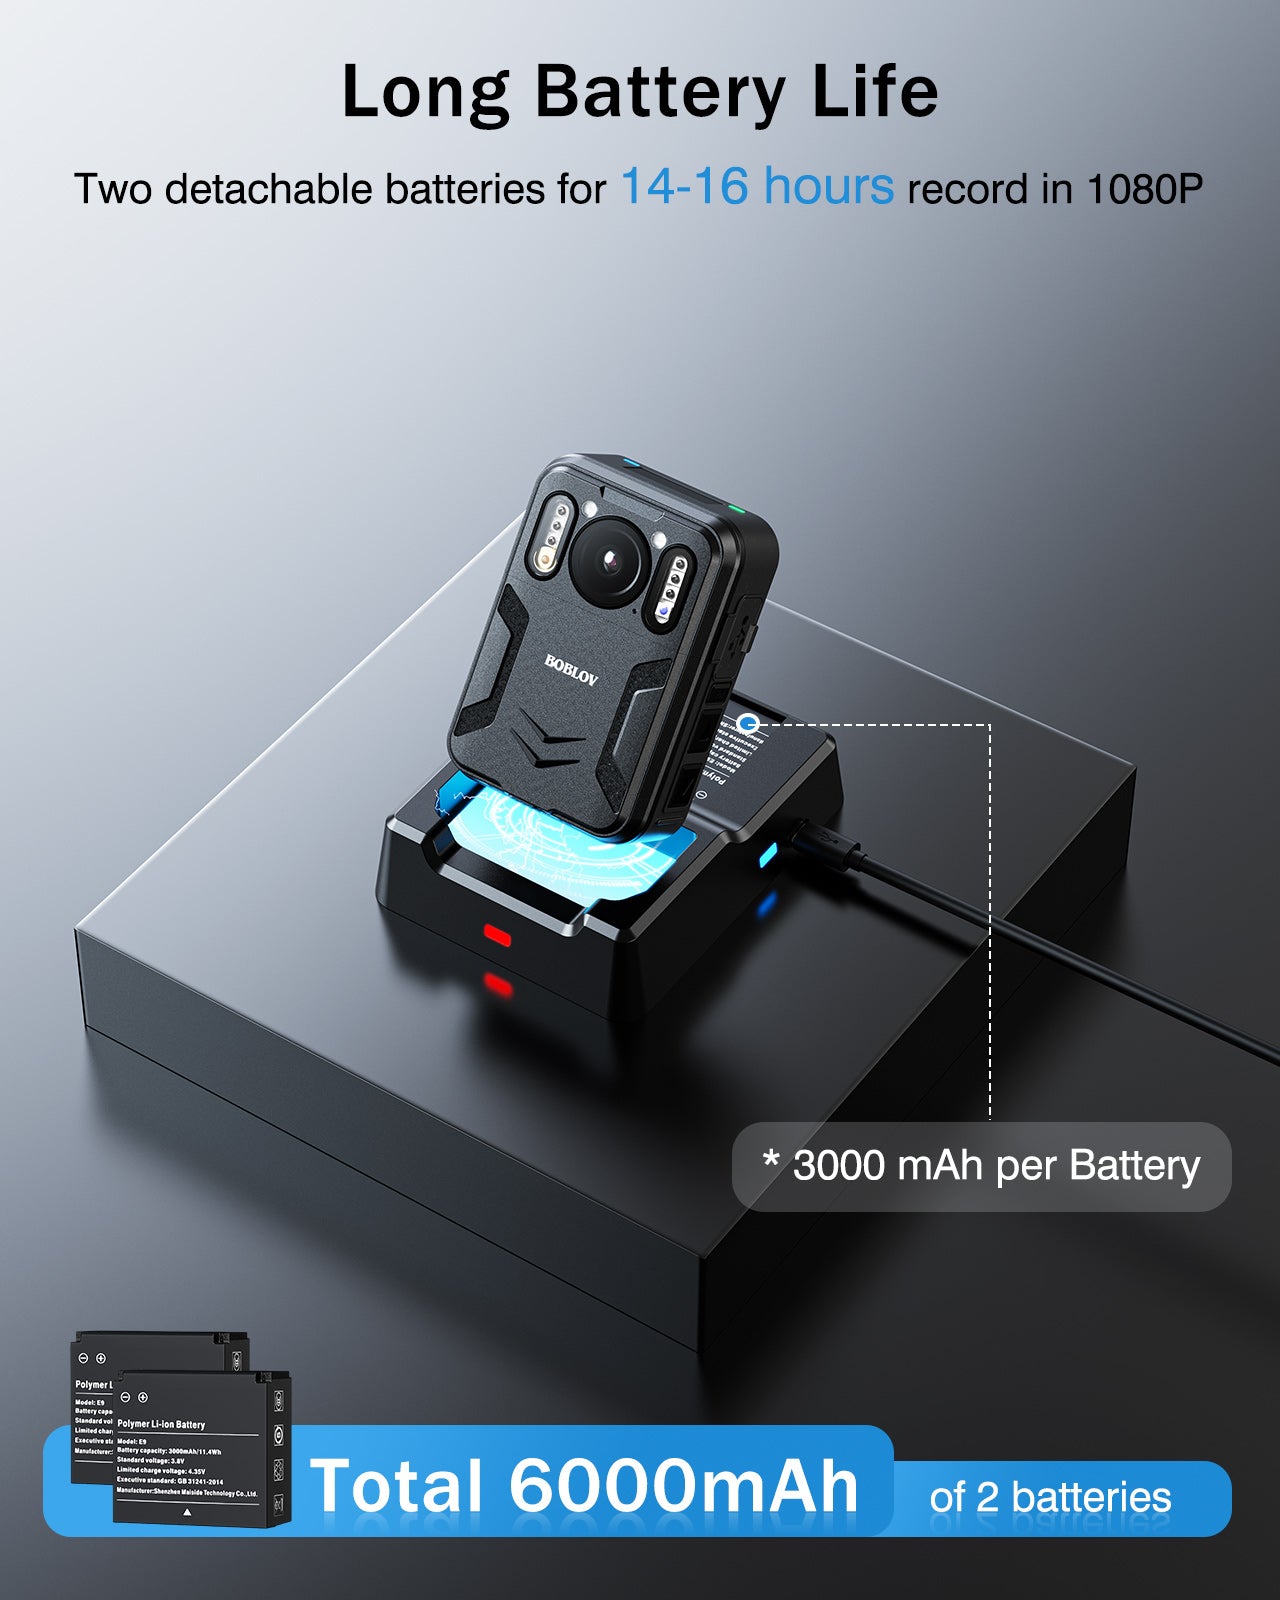 BOBLOV B4K2 128GB 4K Body Camera with GPS, Two 3000mAh Batteries for 14-16 Hrs Record, 4K Bodycam with Charging Dock